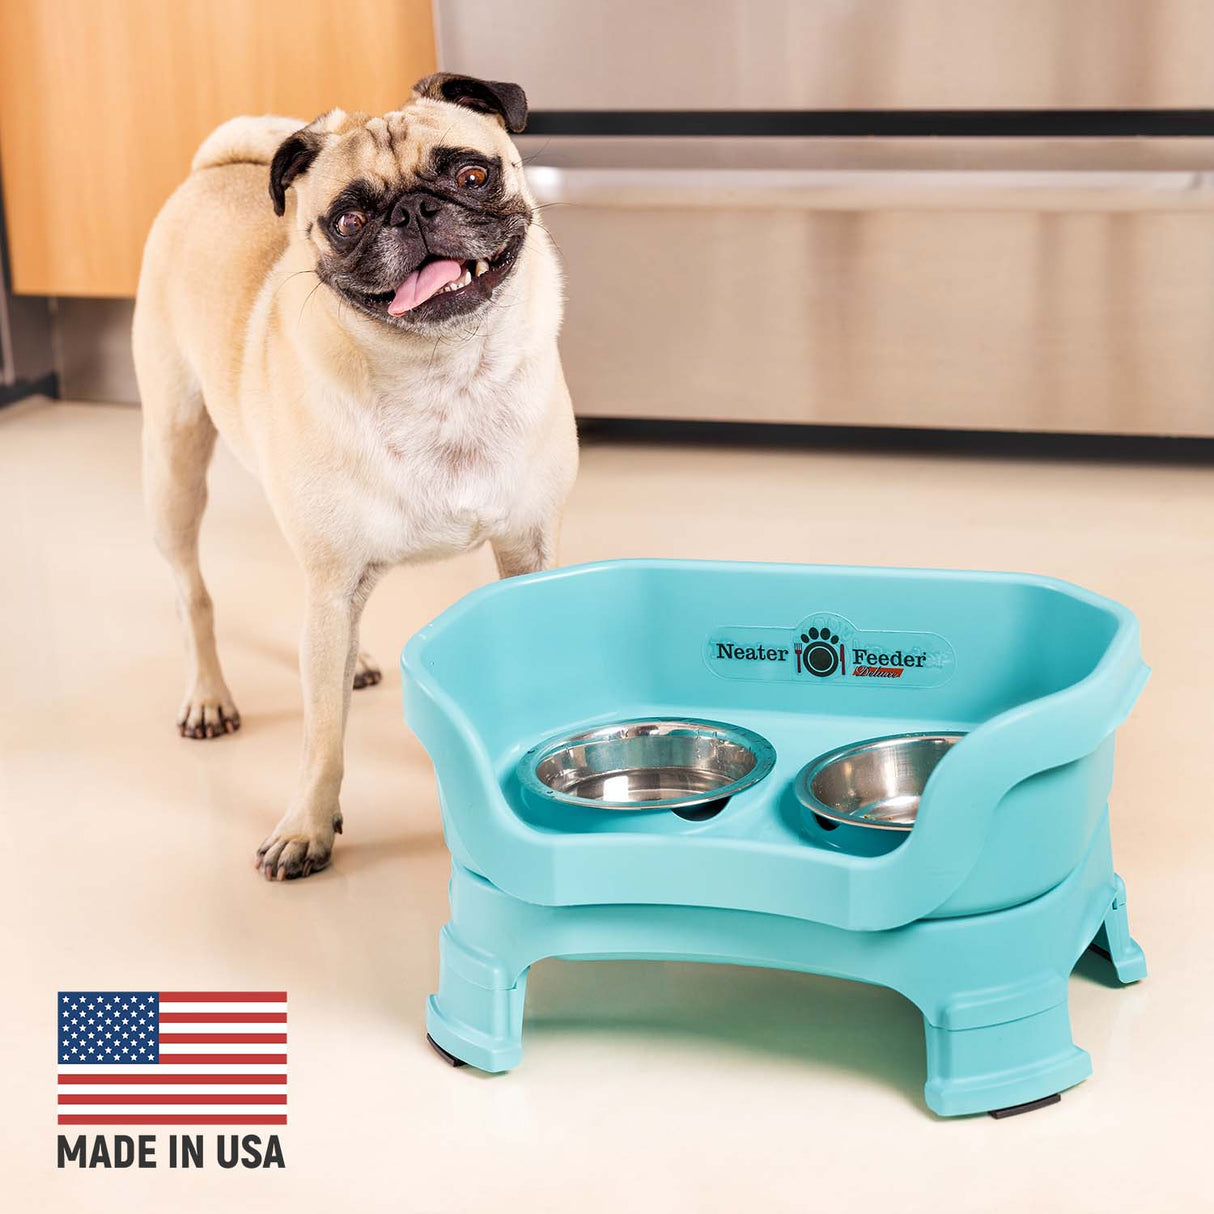 Pug next to Aquamarine Neater Feeder Deluxe - Made in the USA